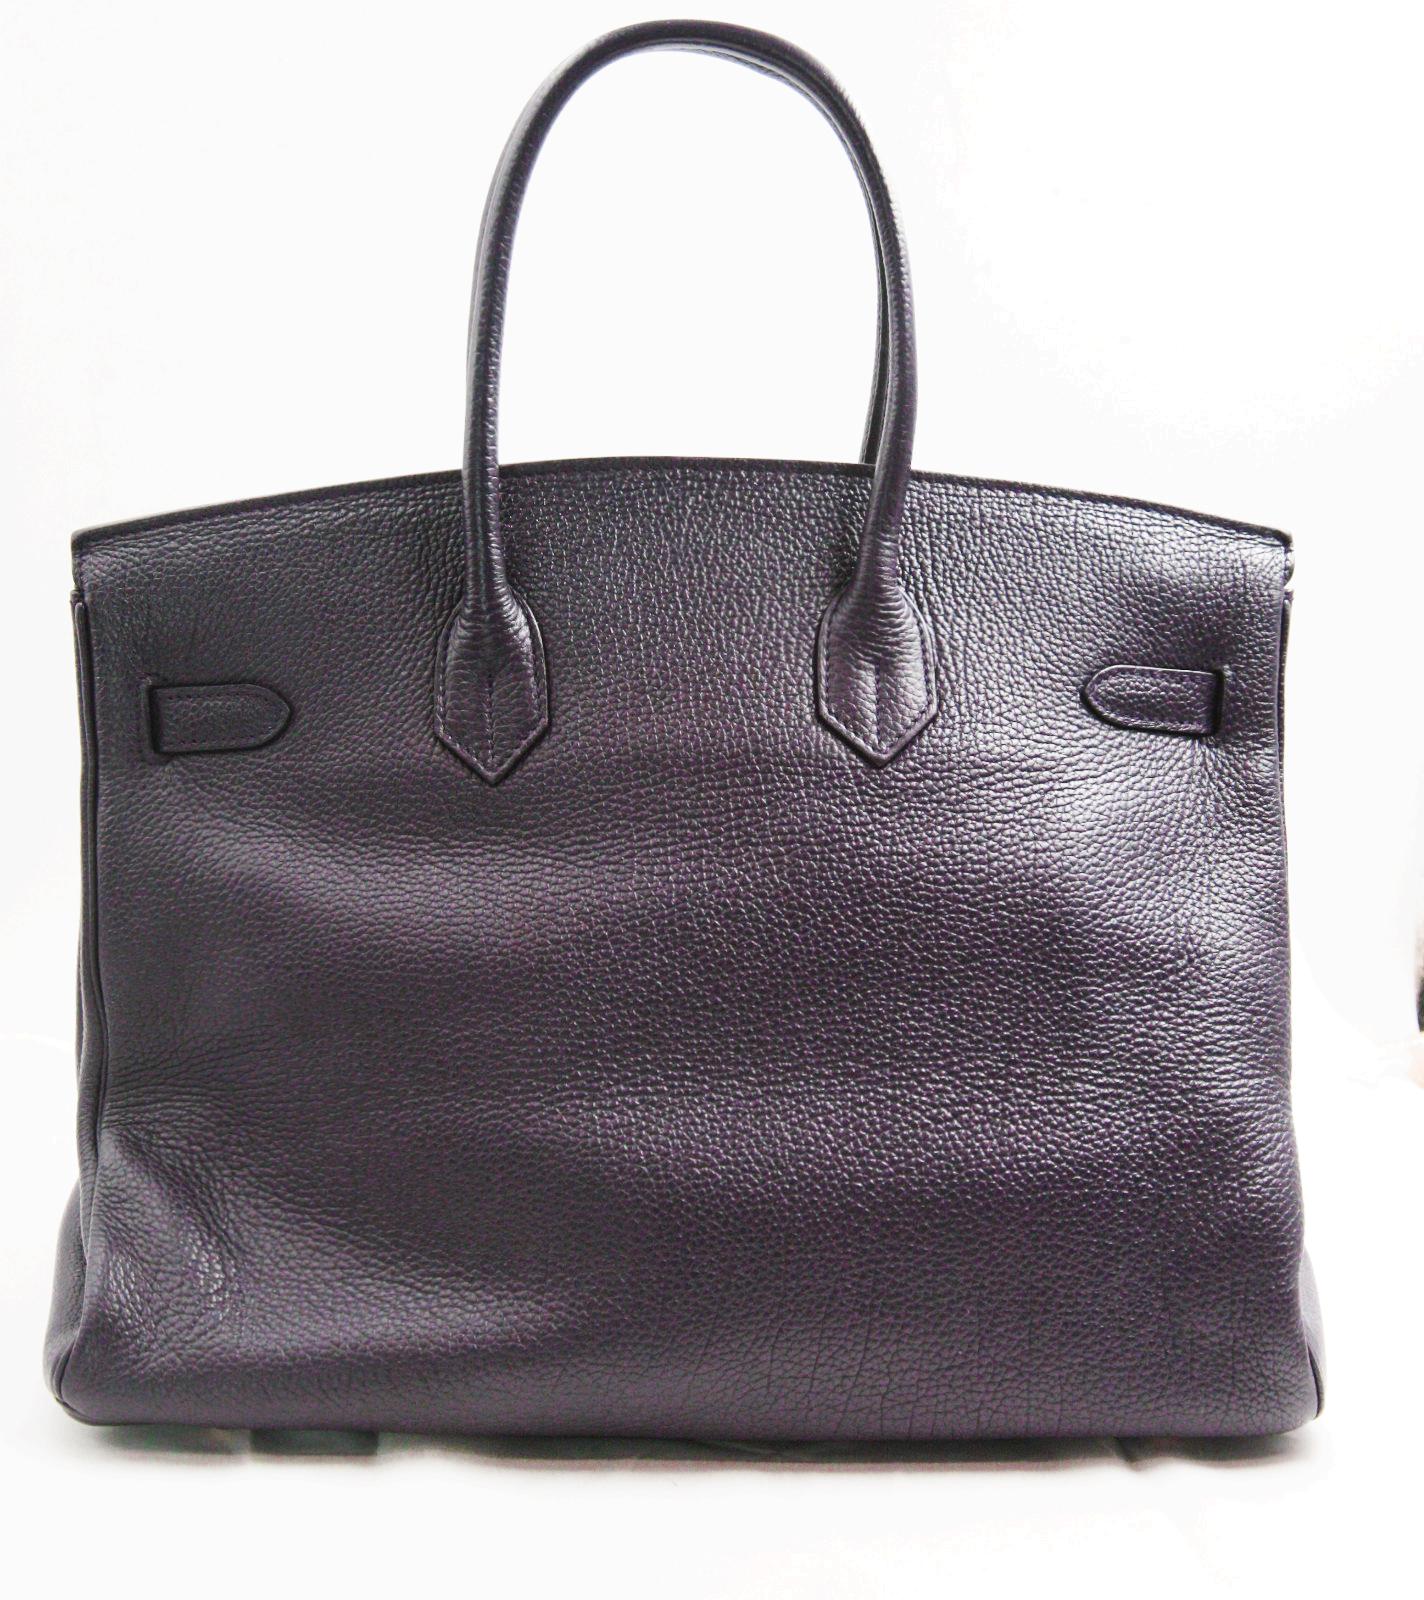 Model:HERMES BIRKIN 35
Color:Raisin/Purple
Material:Togo leather
Hardware:gold 
Measurements:(W)35x(H)25x(D)18cm
Accompanied by: Hermes dustbag, lock, two keys.
Stamp:M